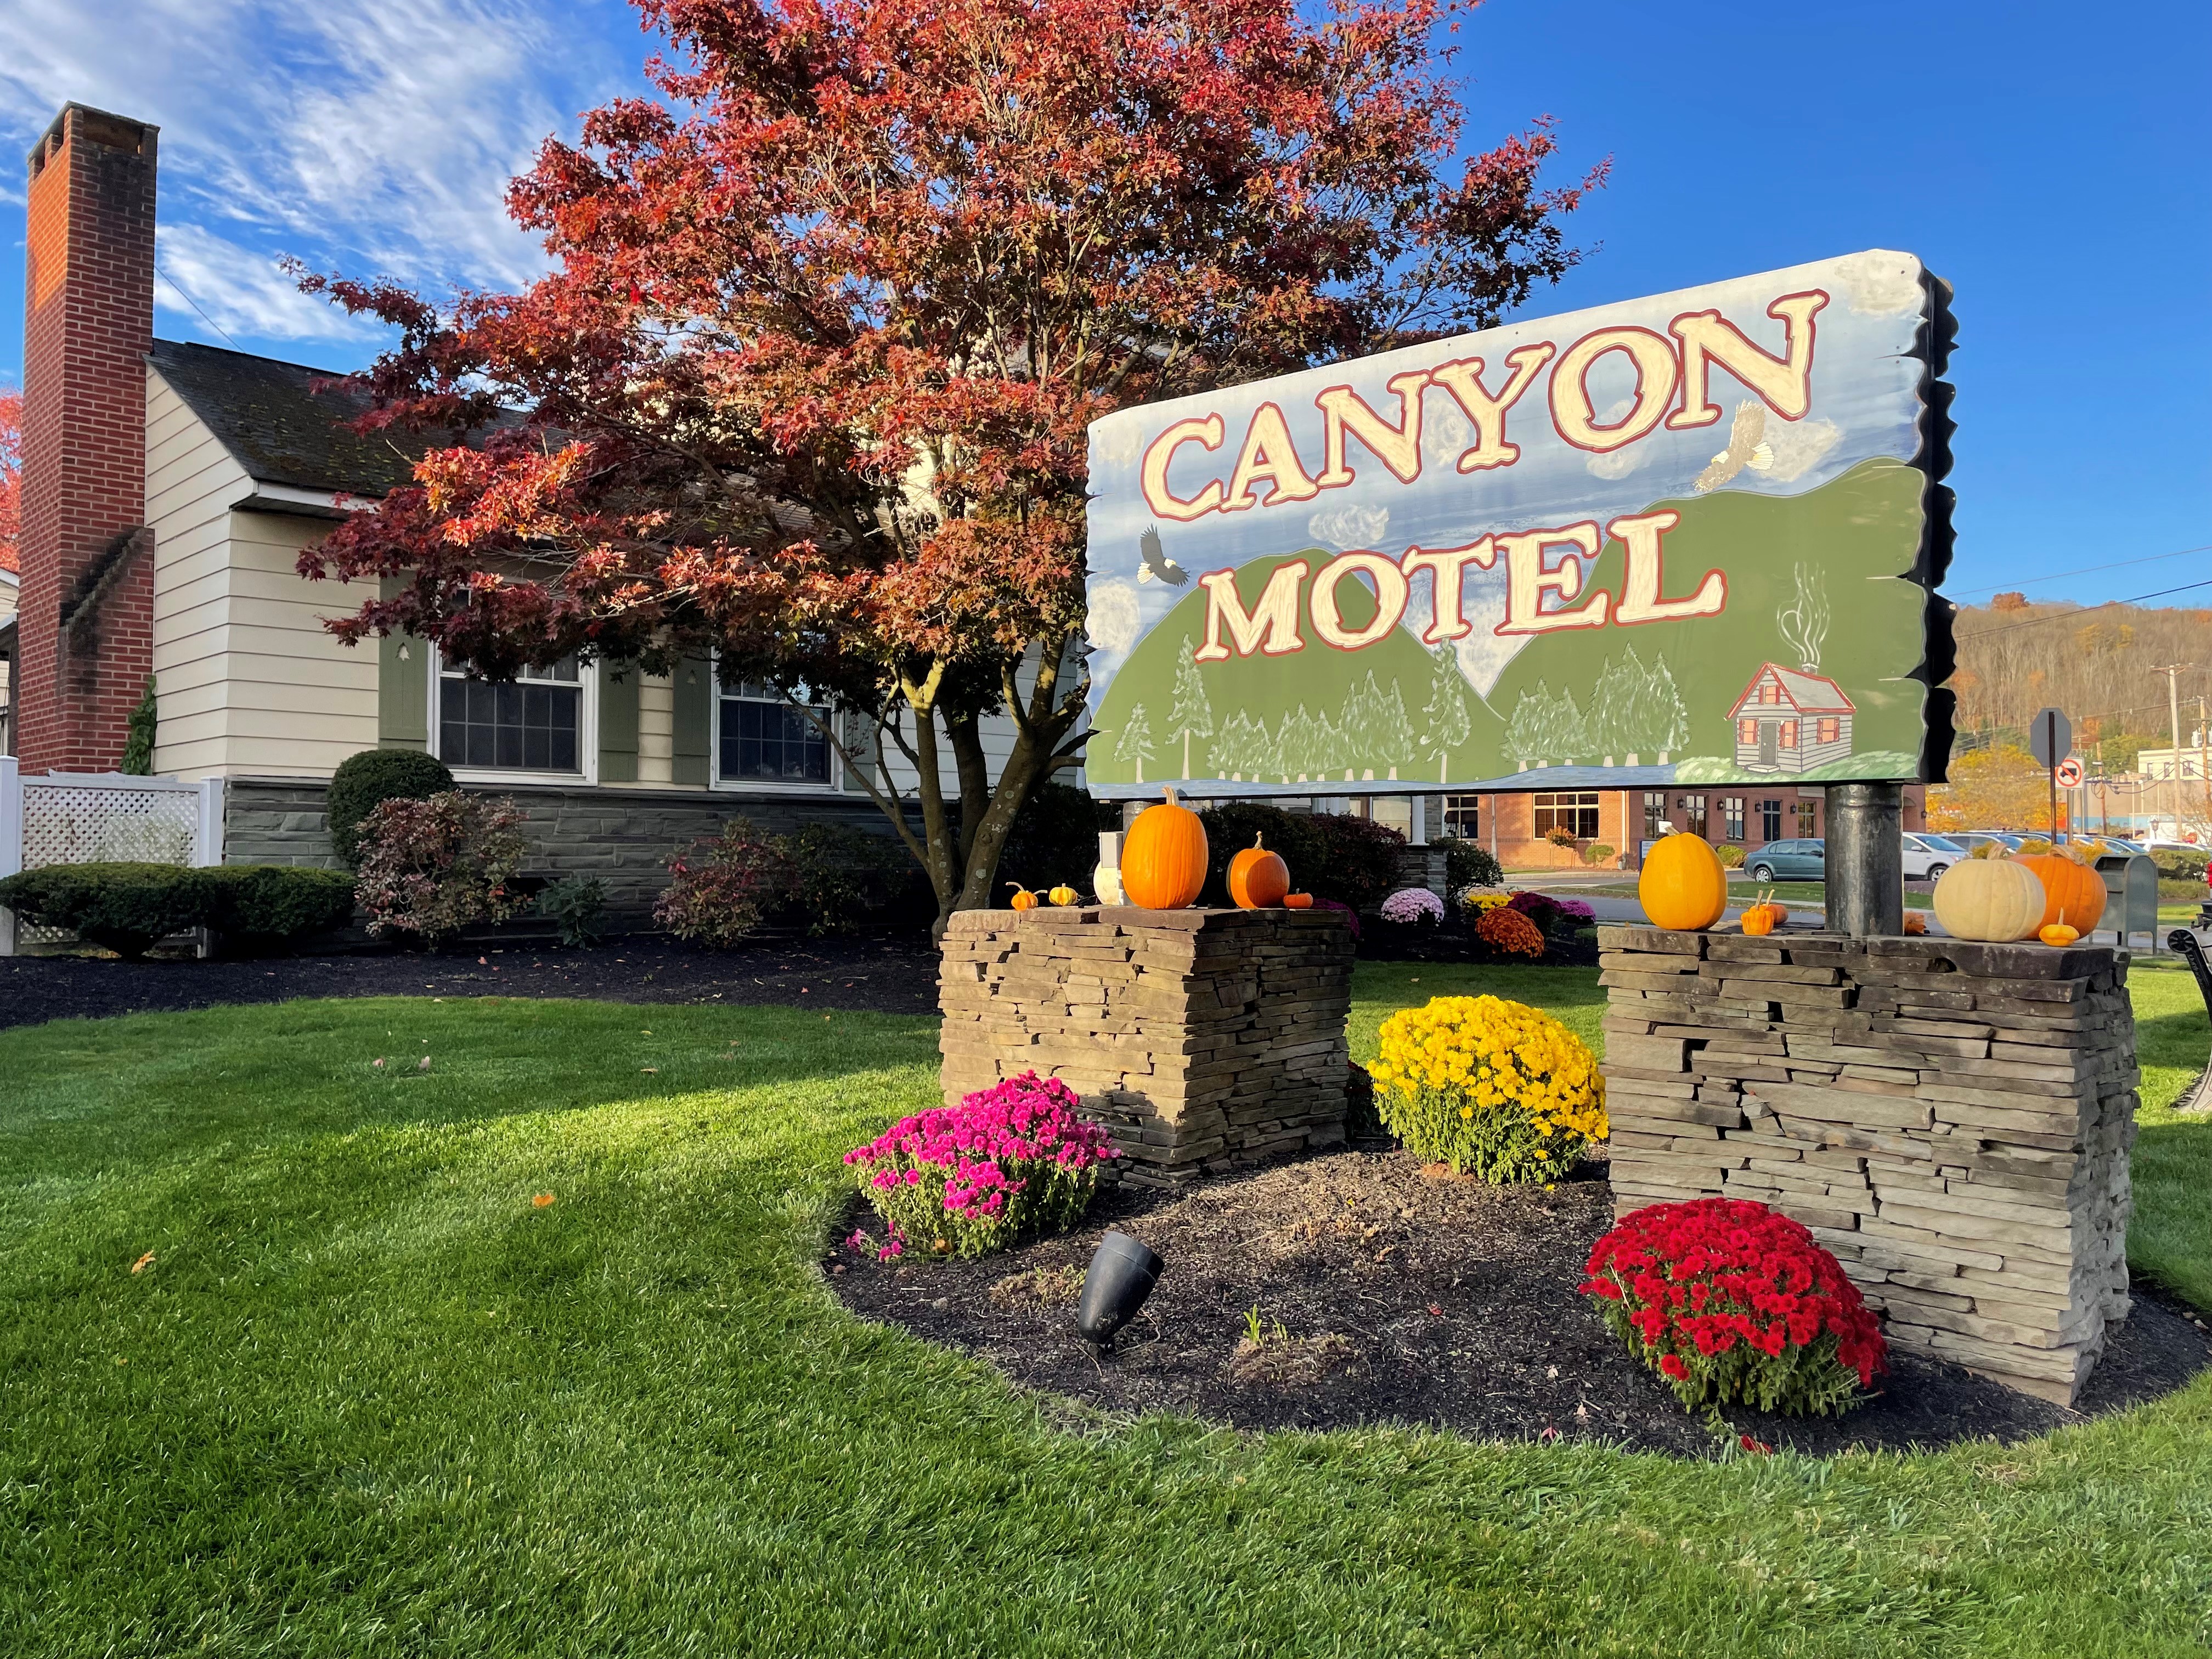 canyon-motel-sign-exterior-home-page